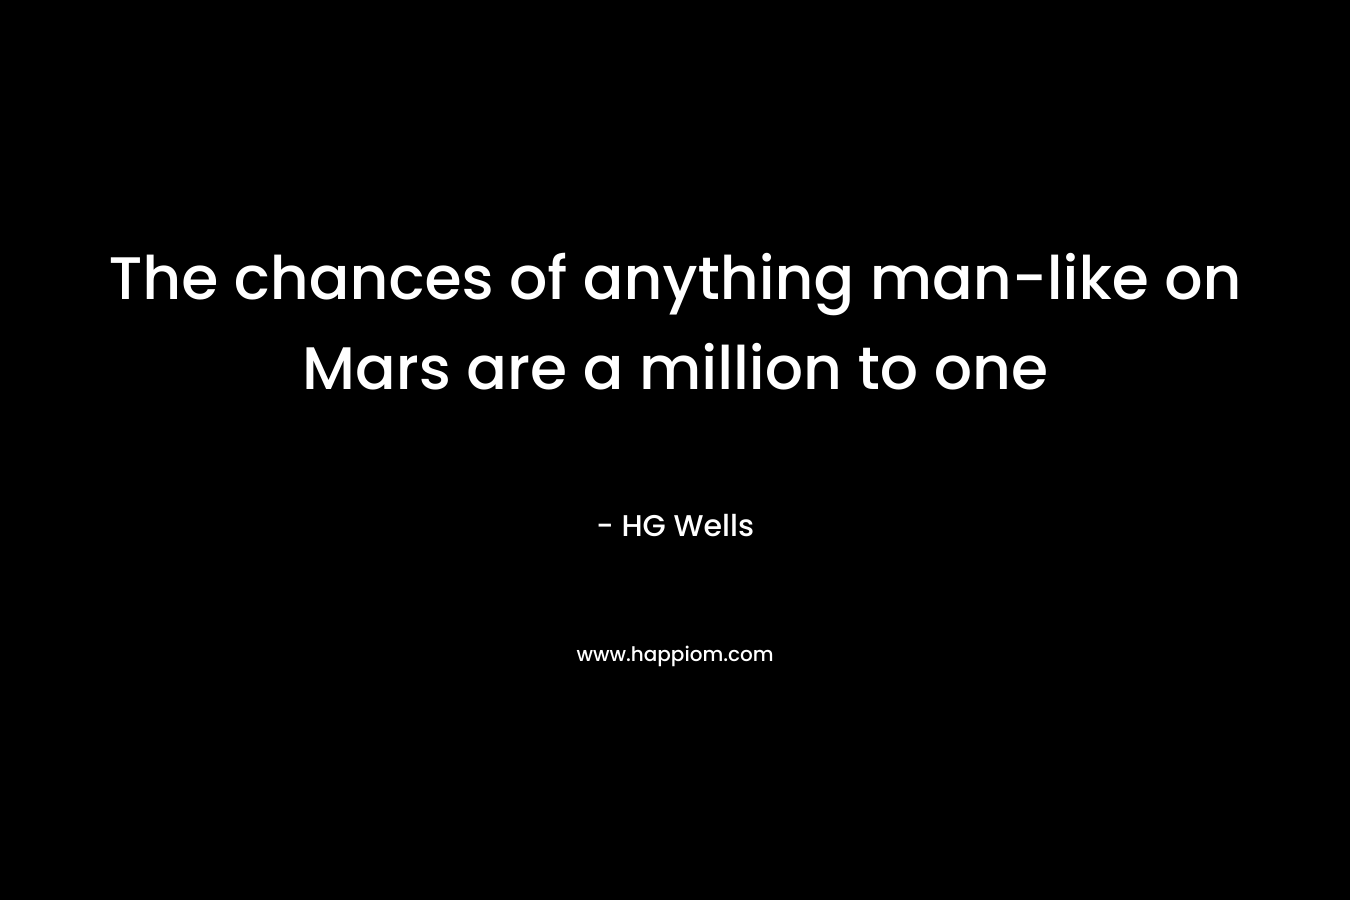 The chances of anything man-like on Mars are a million to one – HG Wells